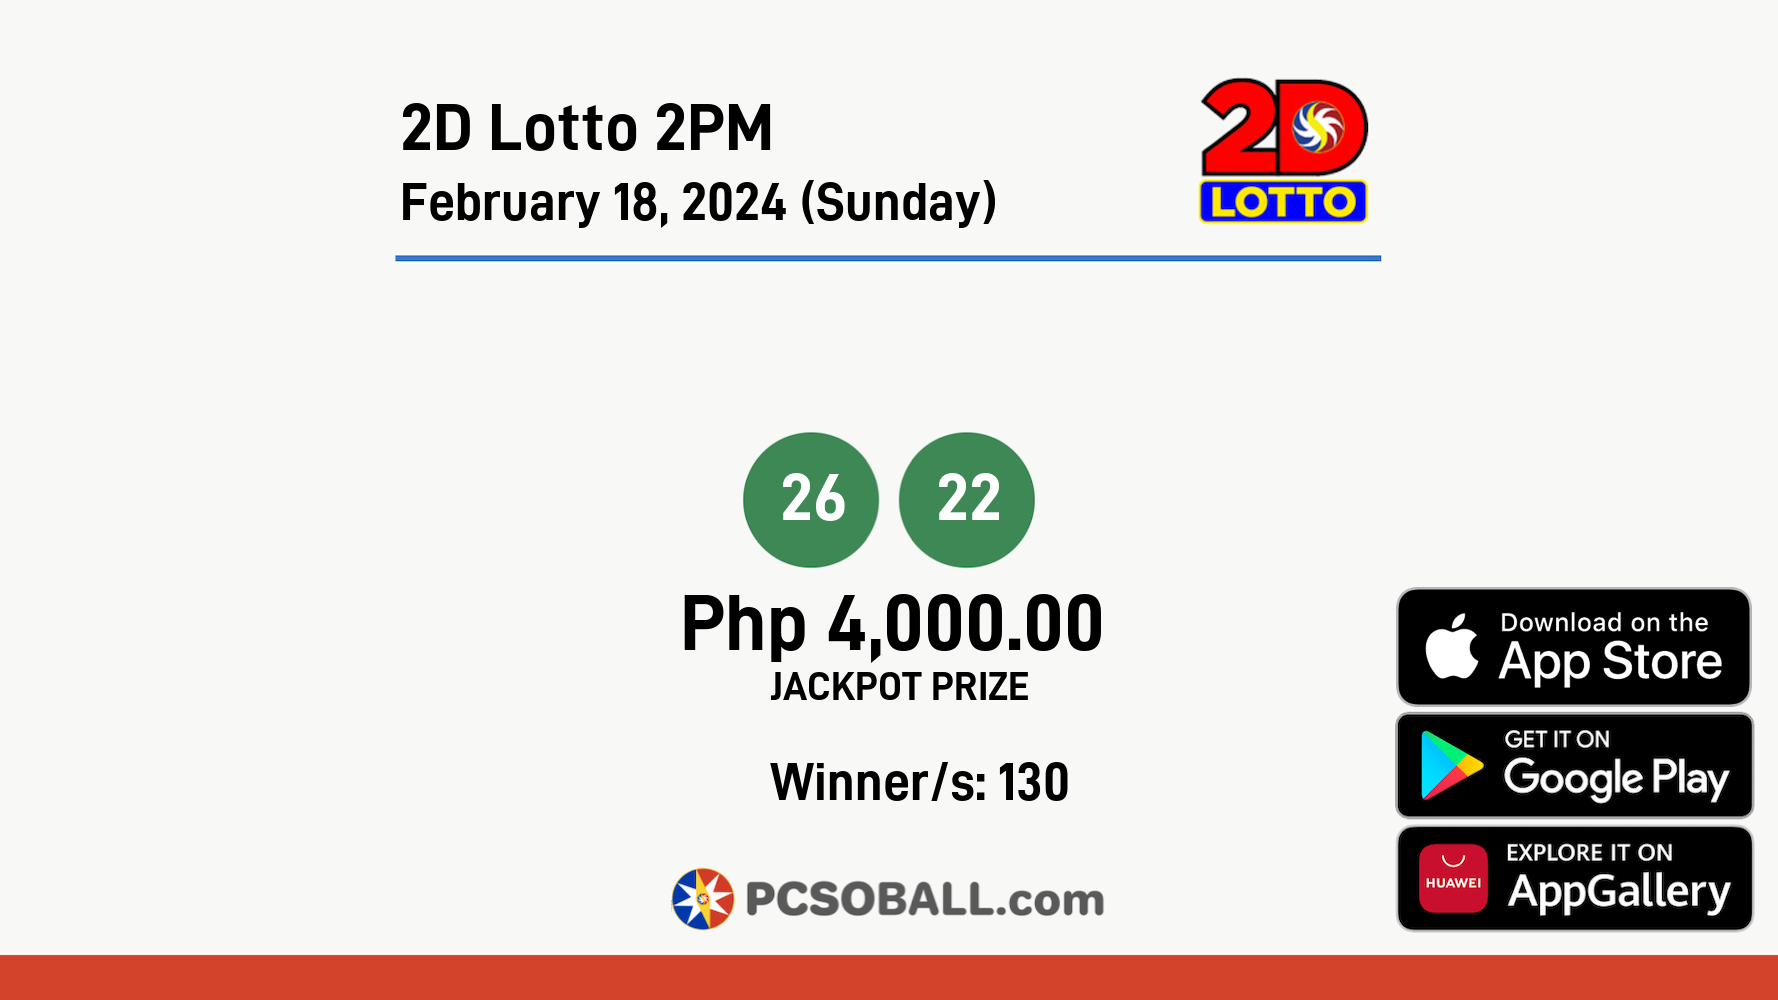 2D Lotto 2PM February 18, 2024 (Sunday) Result